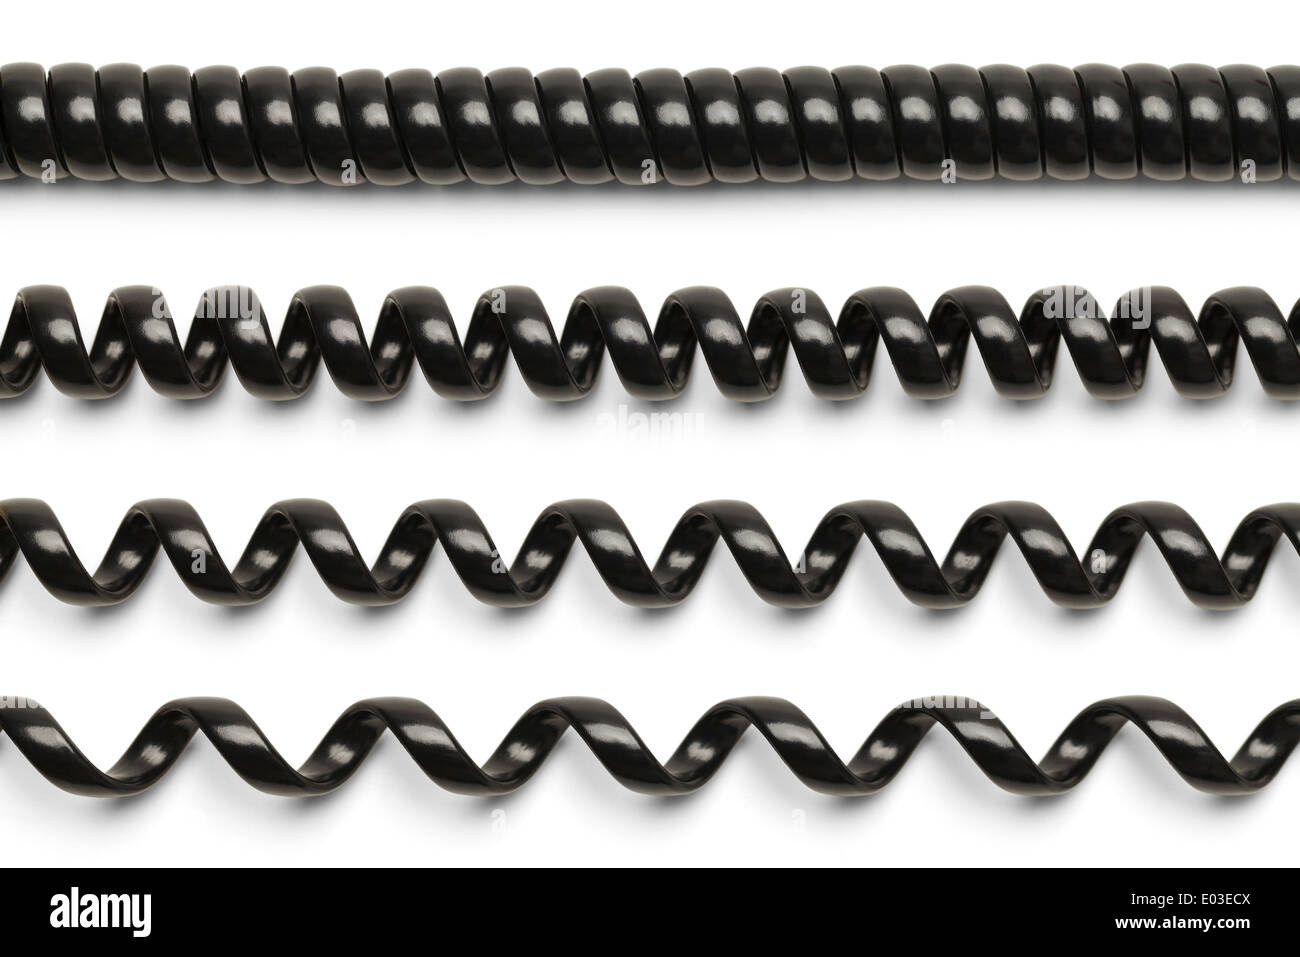 Phone Cord Segments that Range from Closed Up to Stretched Out. Stock Photo